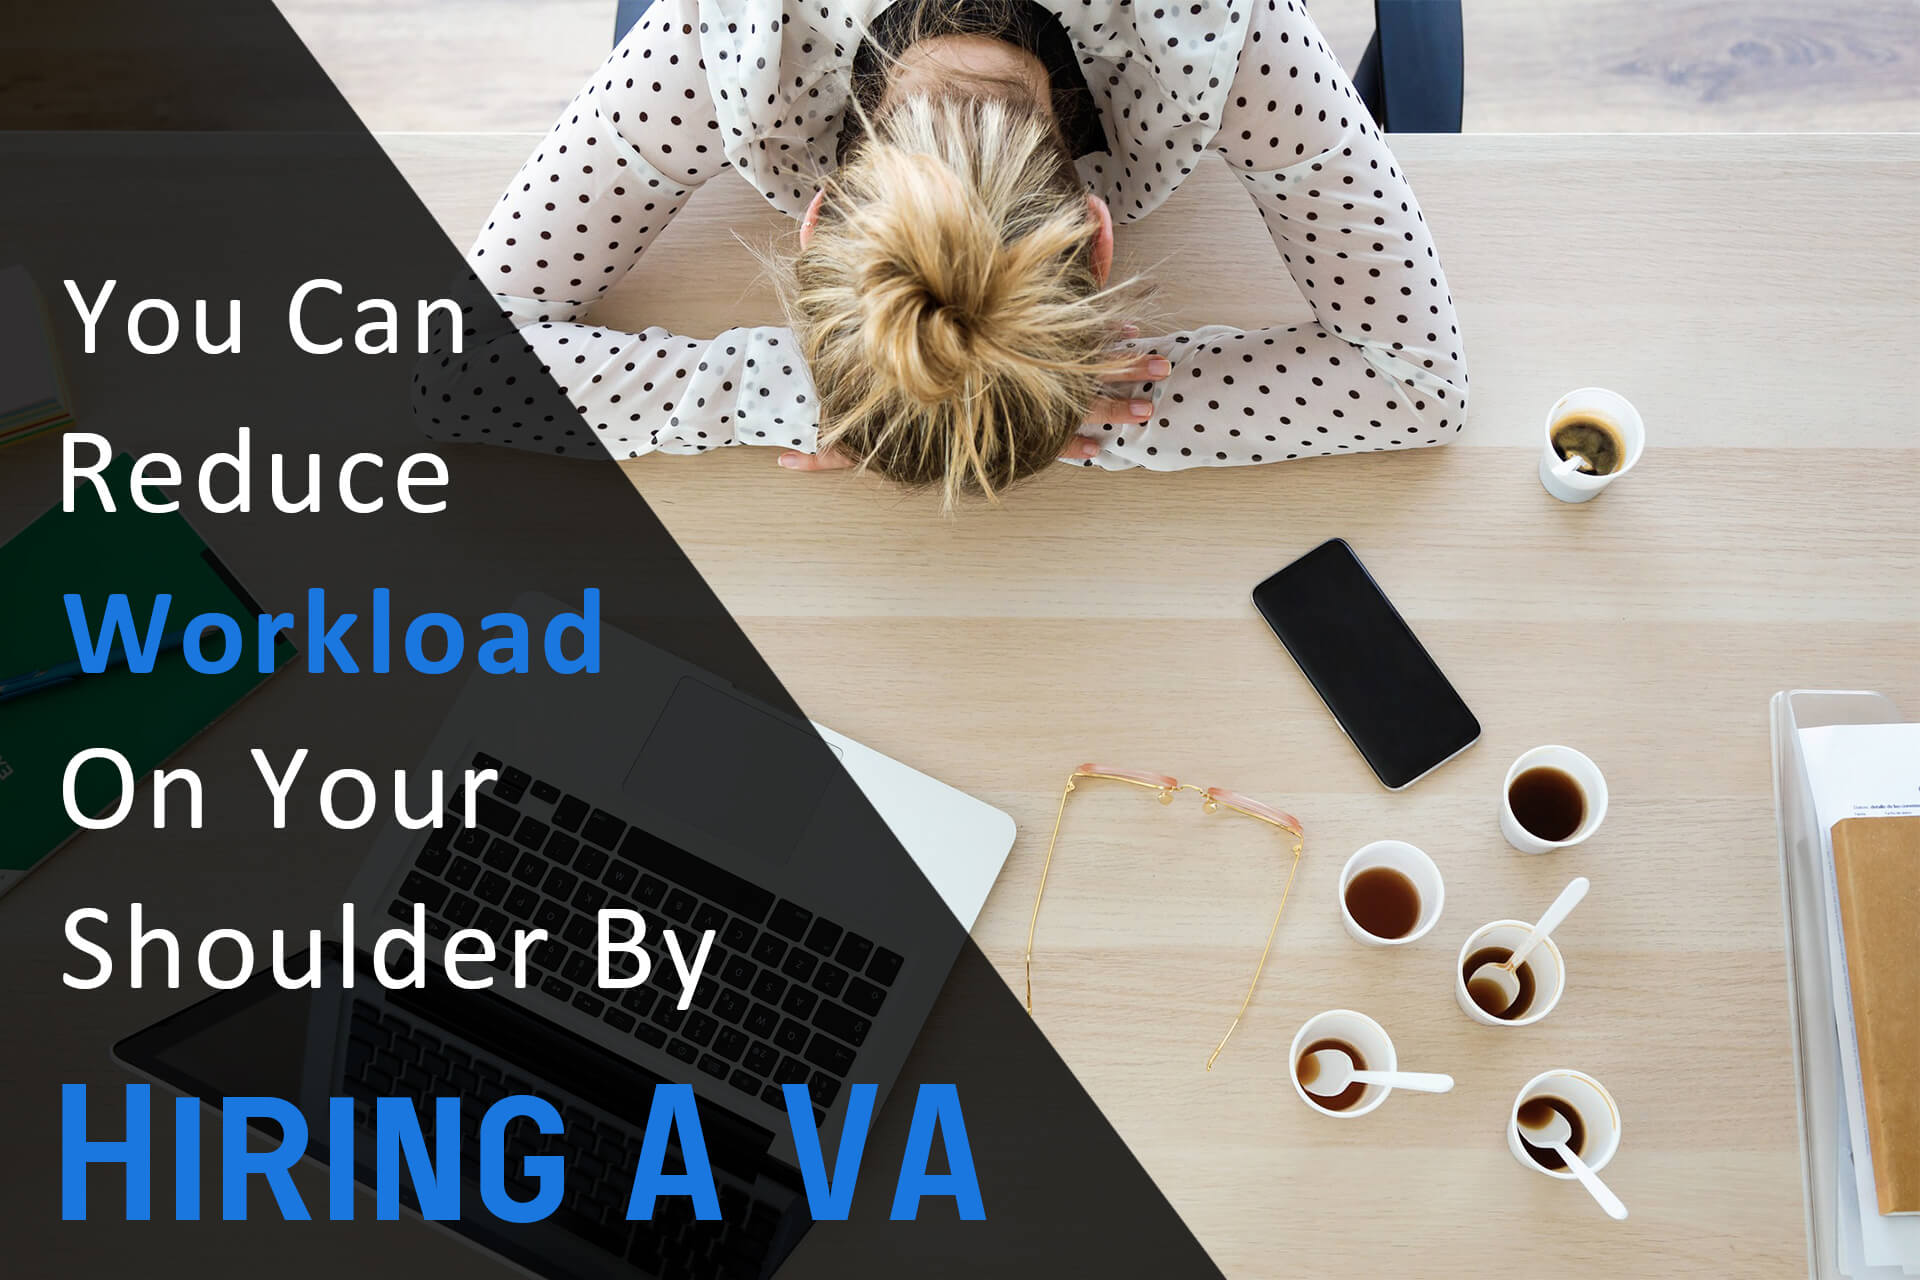 You Can Reduce Workload On Your Shoulder By Hiring A VA